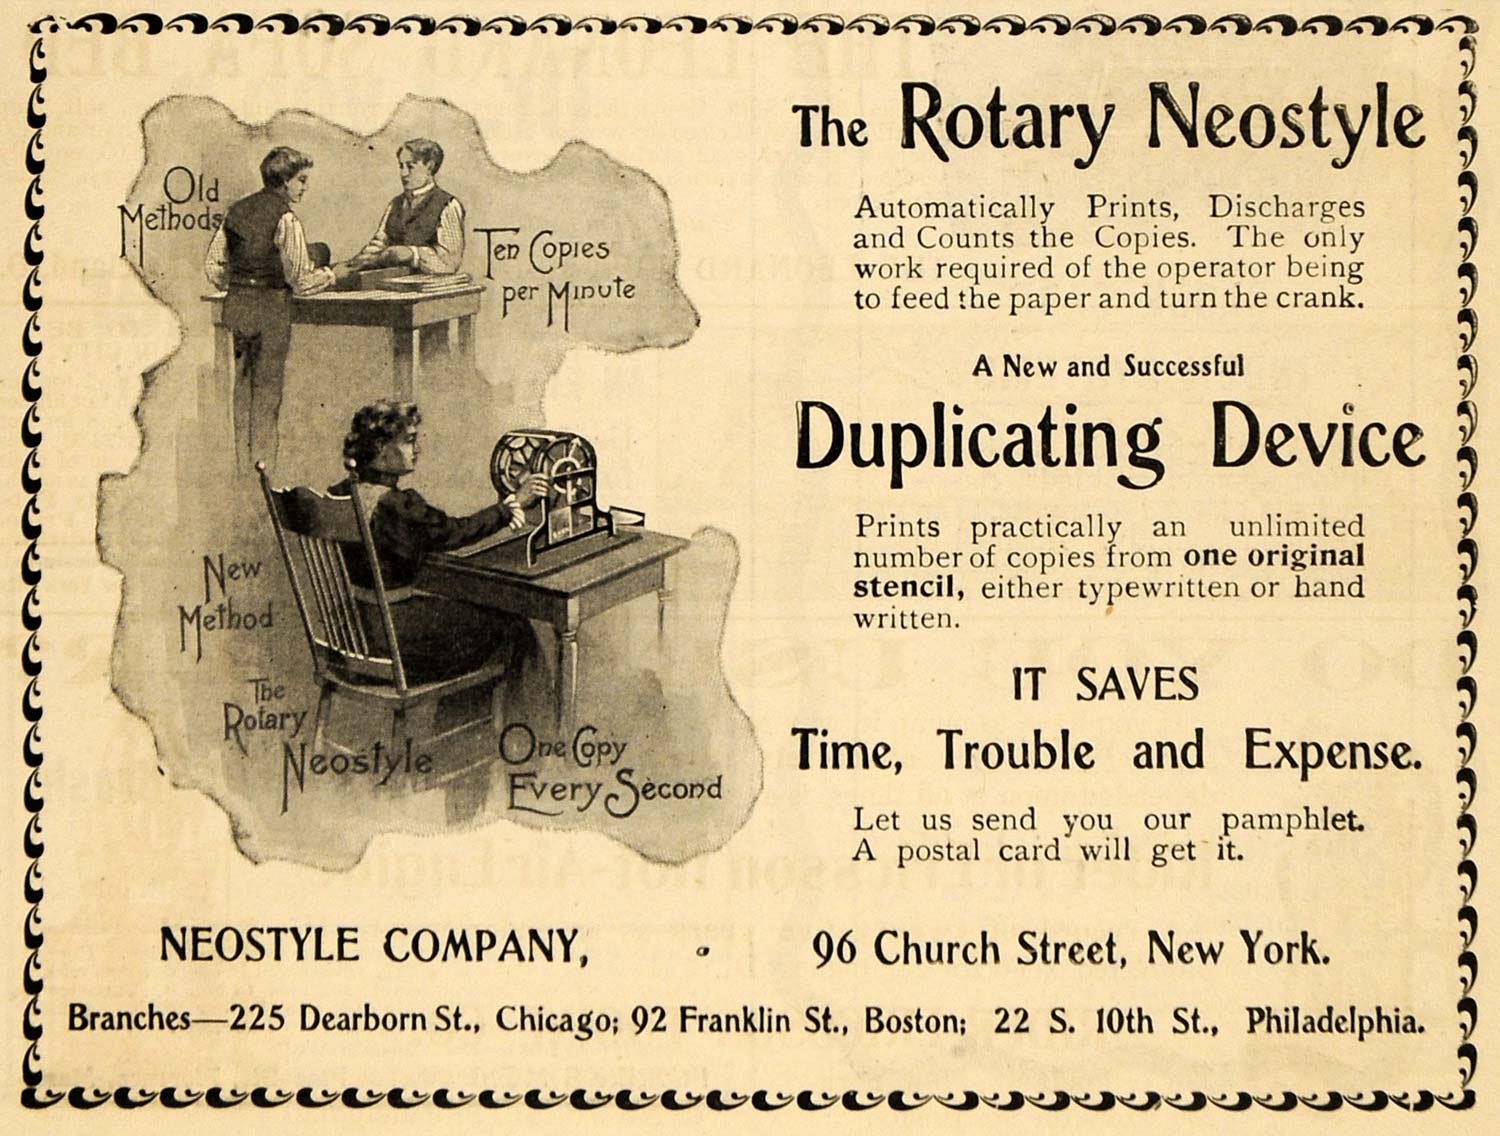 1900 Ad Neostyle Co. Duplicating Device Copy Printing - ORIGINAL TOM3